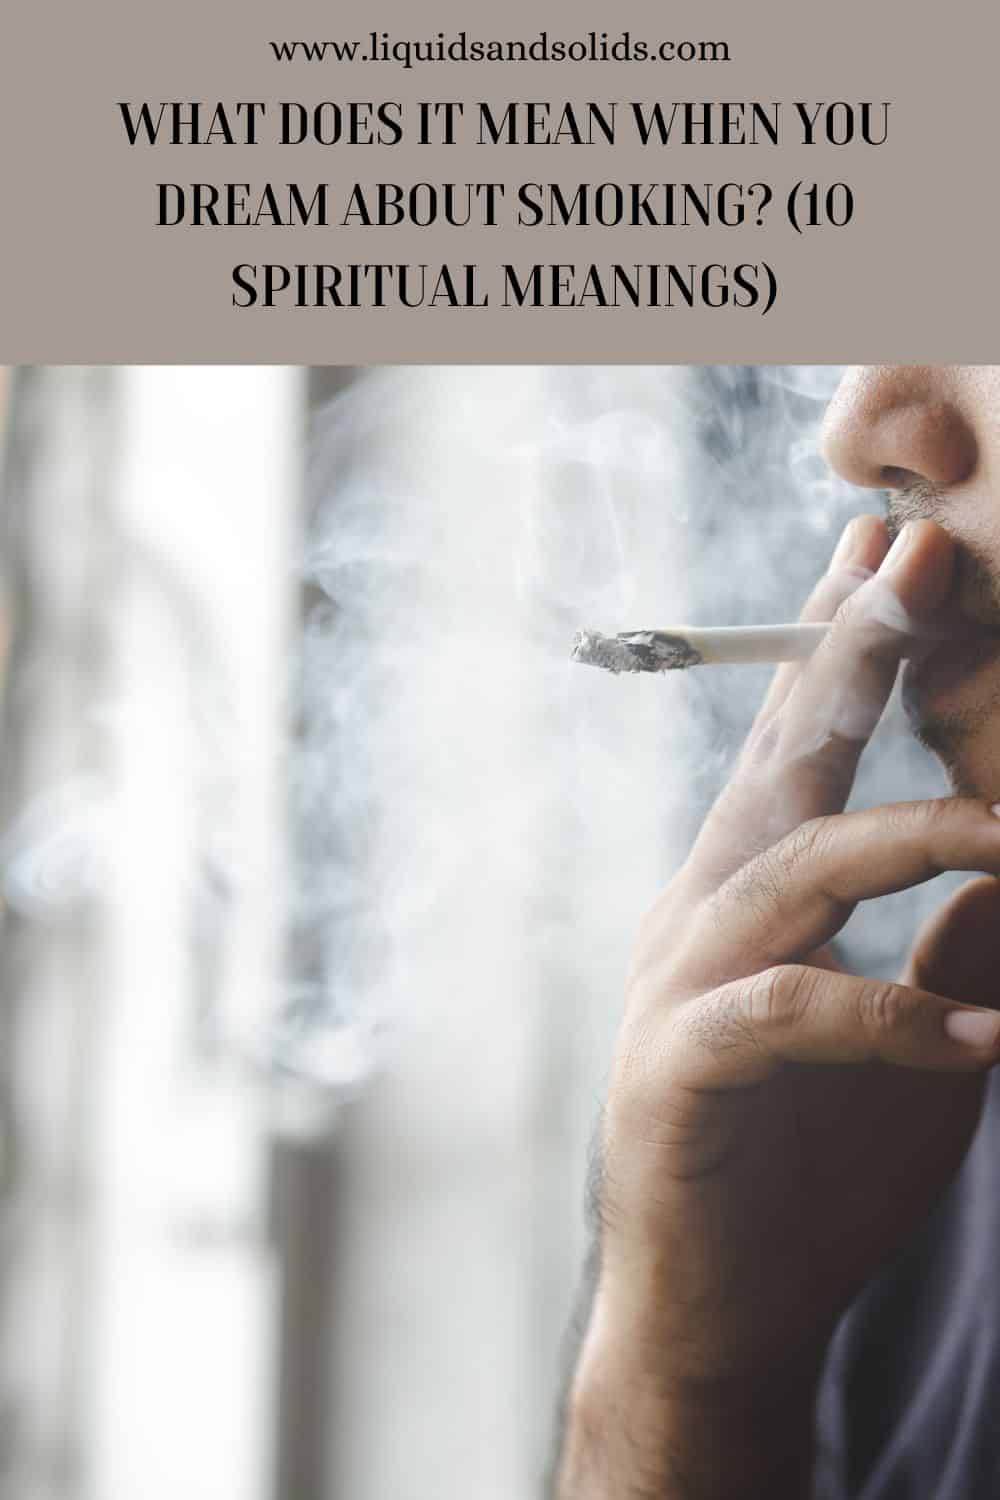 What Does It Mean When You Dream About Smoking (10 Spiritual Meanings)